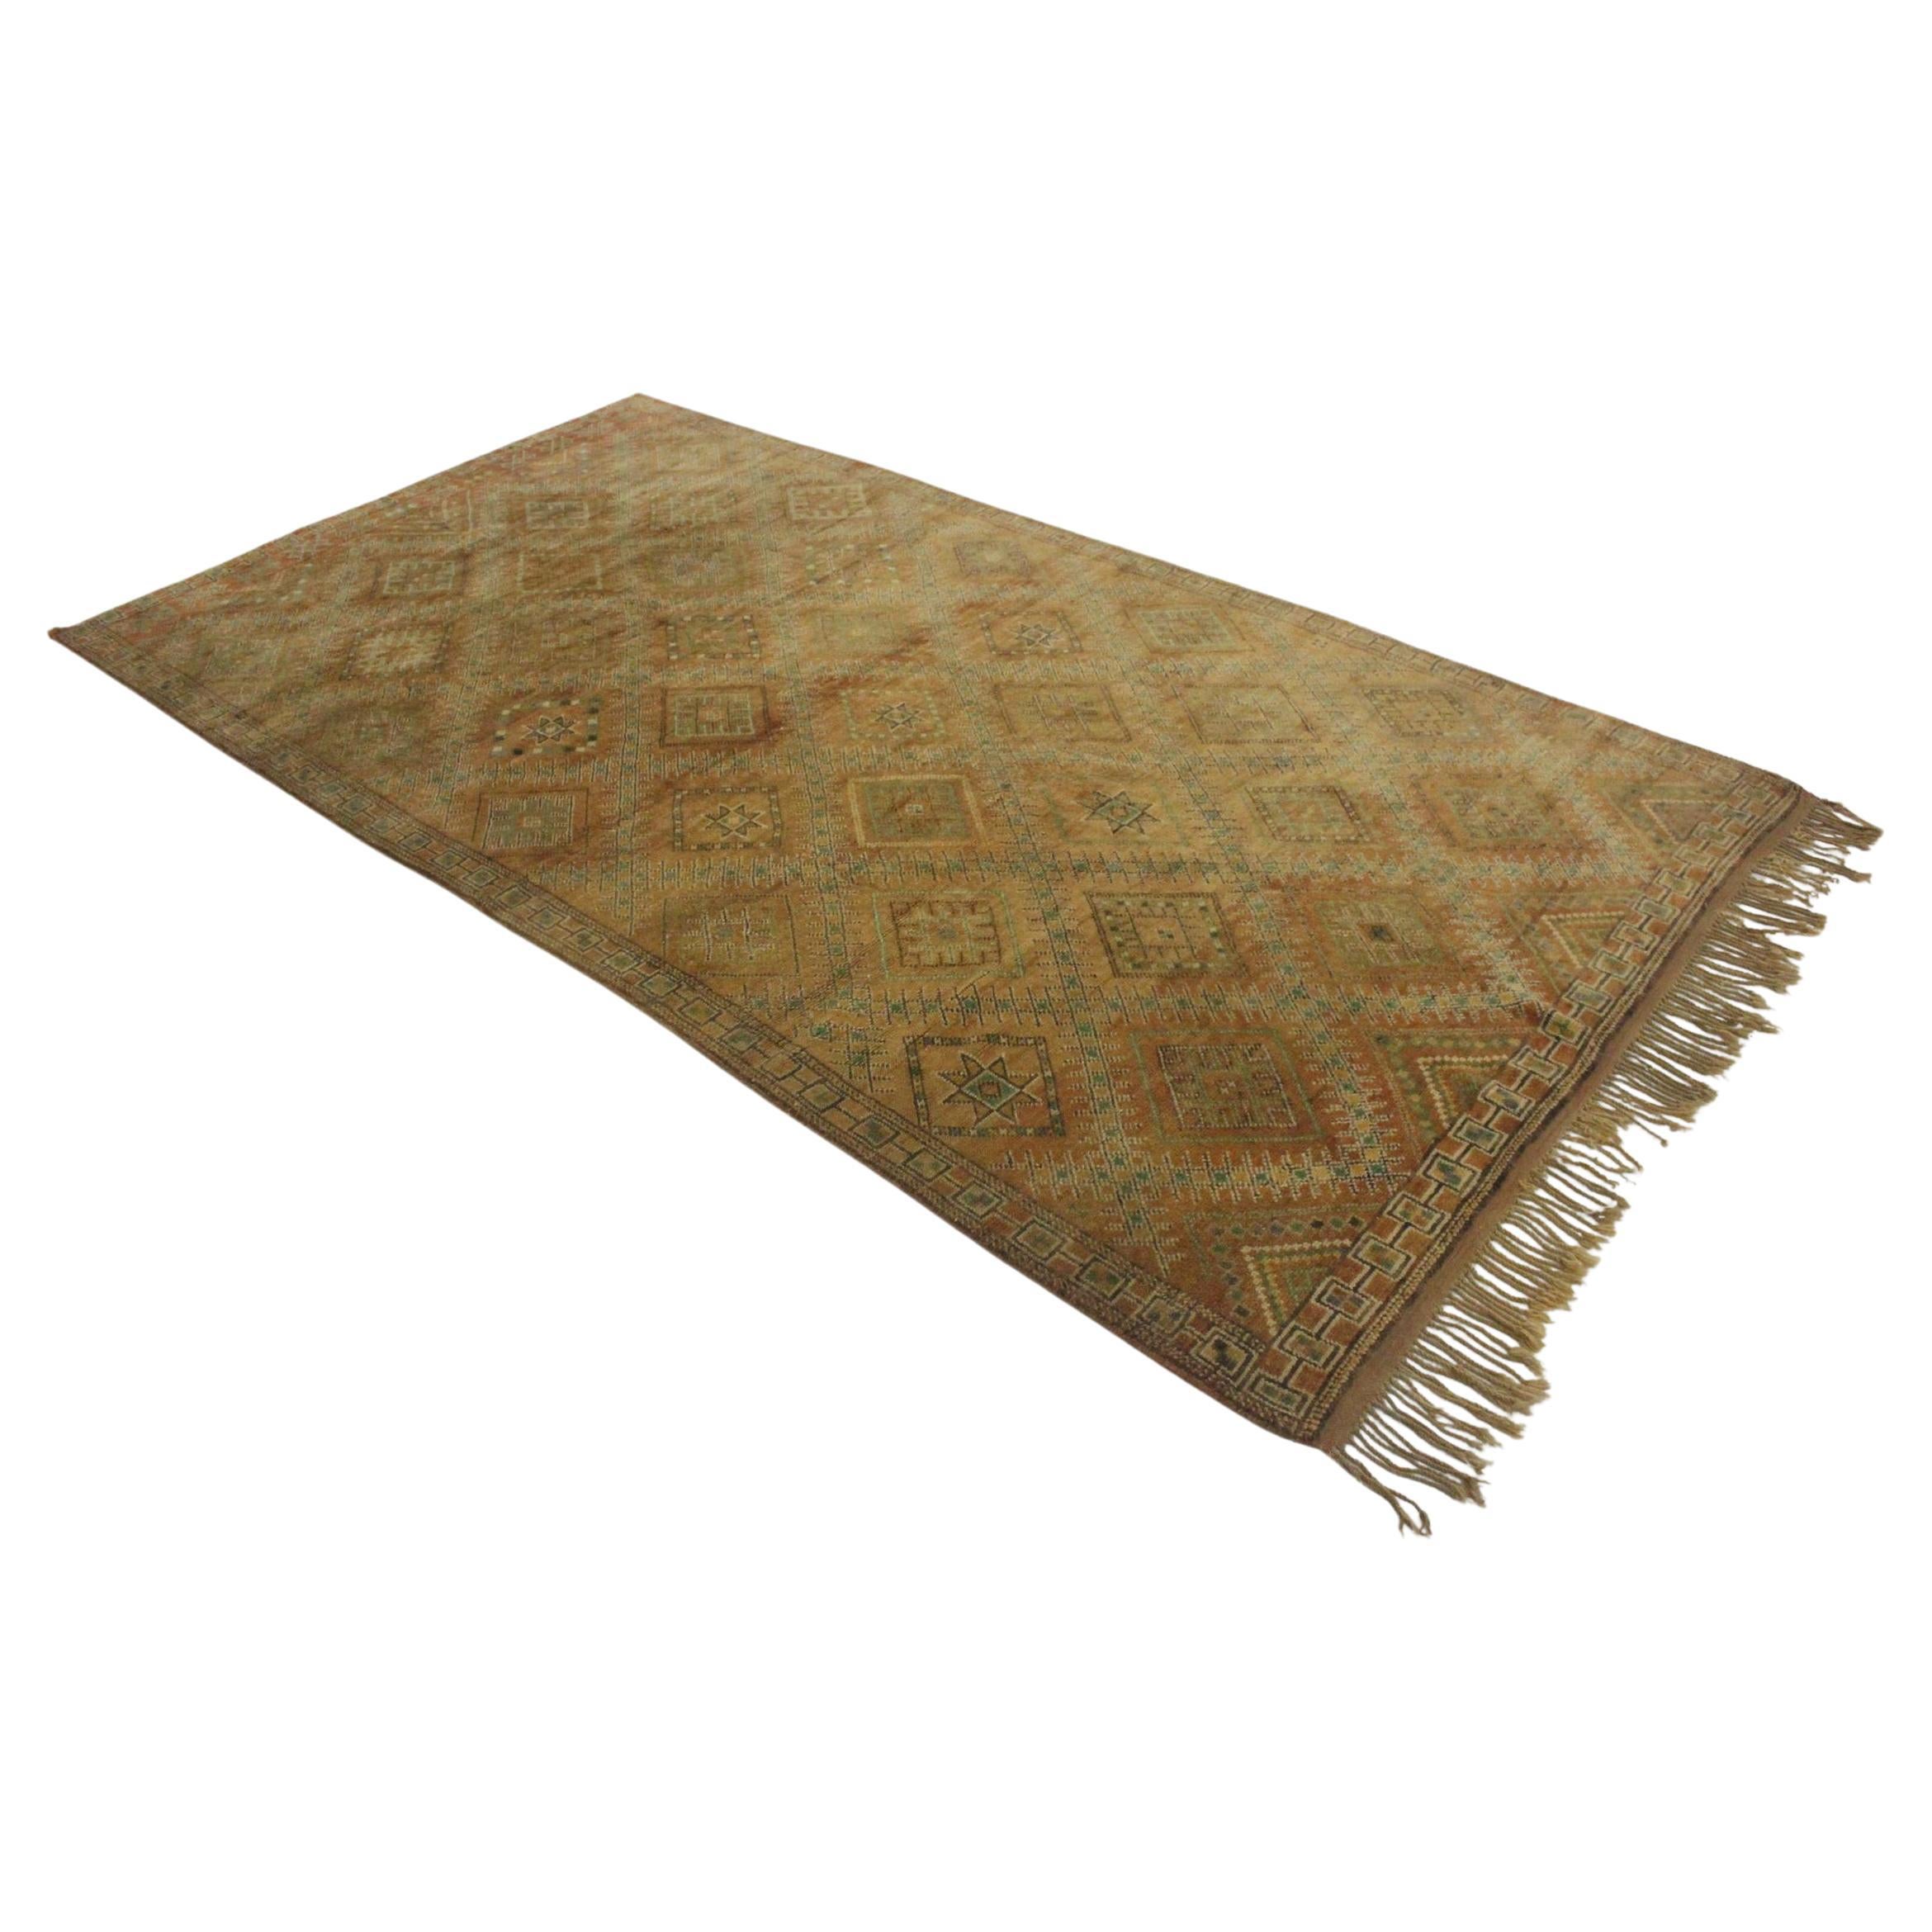 Vintage Moroccan Zemmour rug - Ochre - 6x11.3feet / 185x345cm For Sale